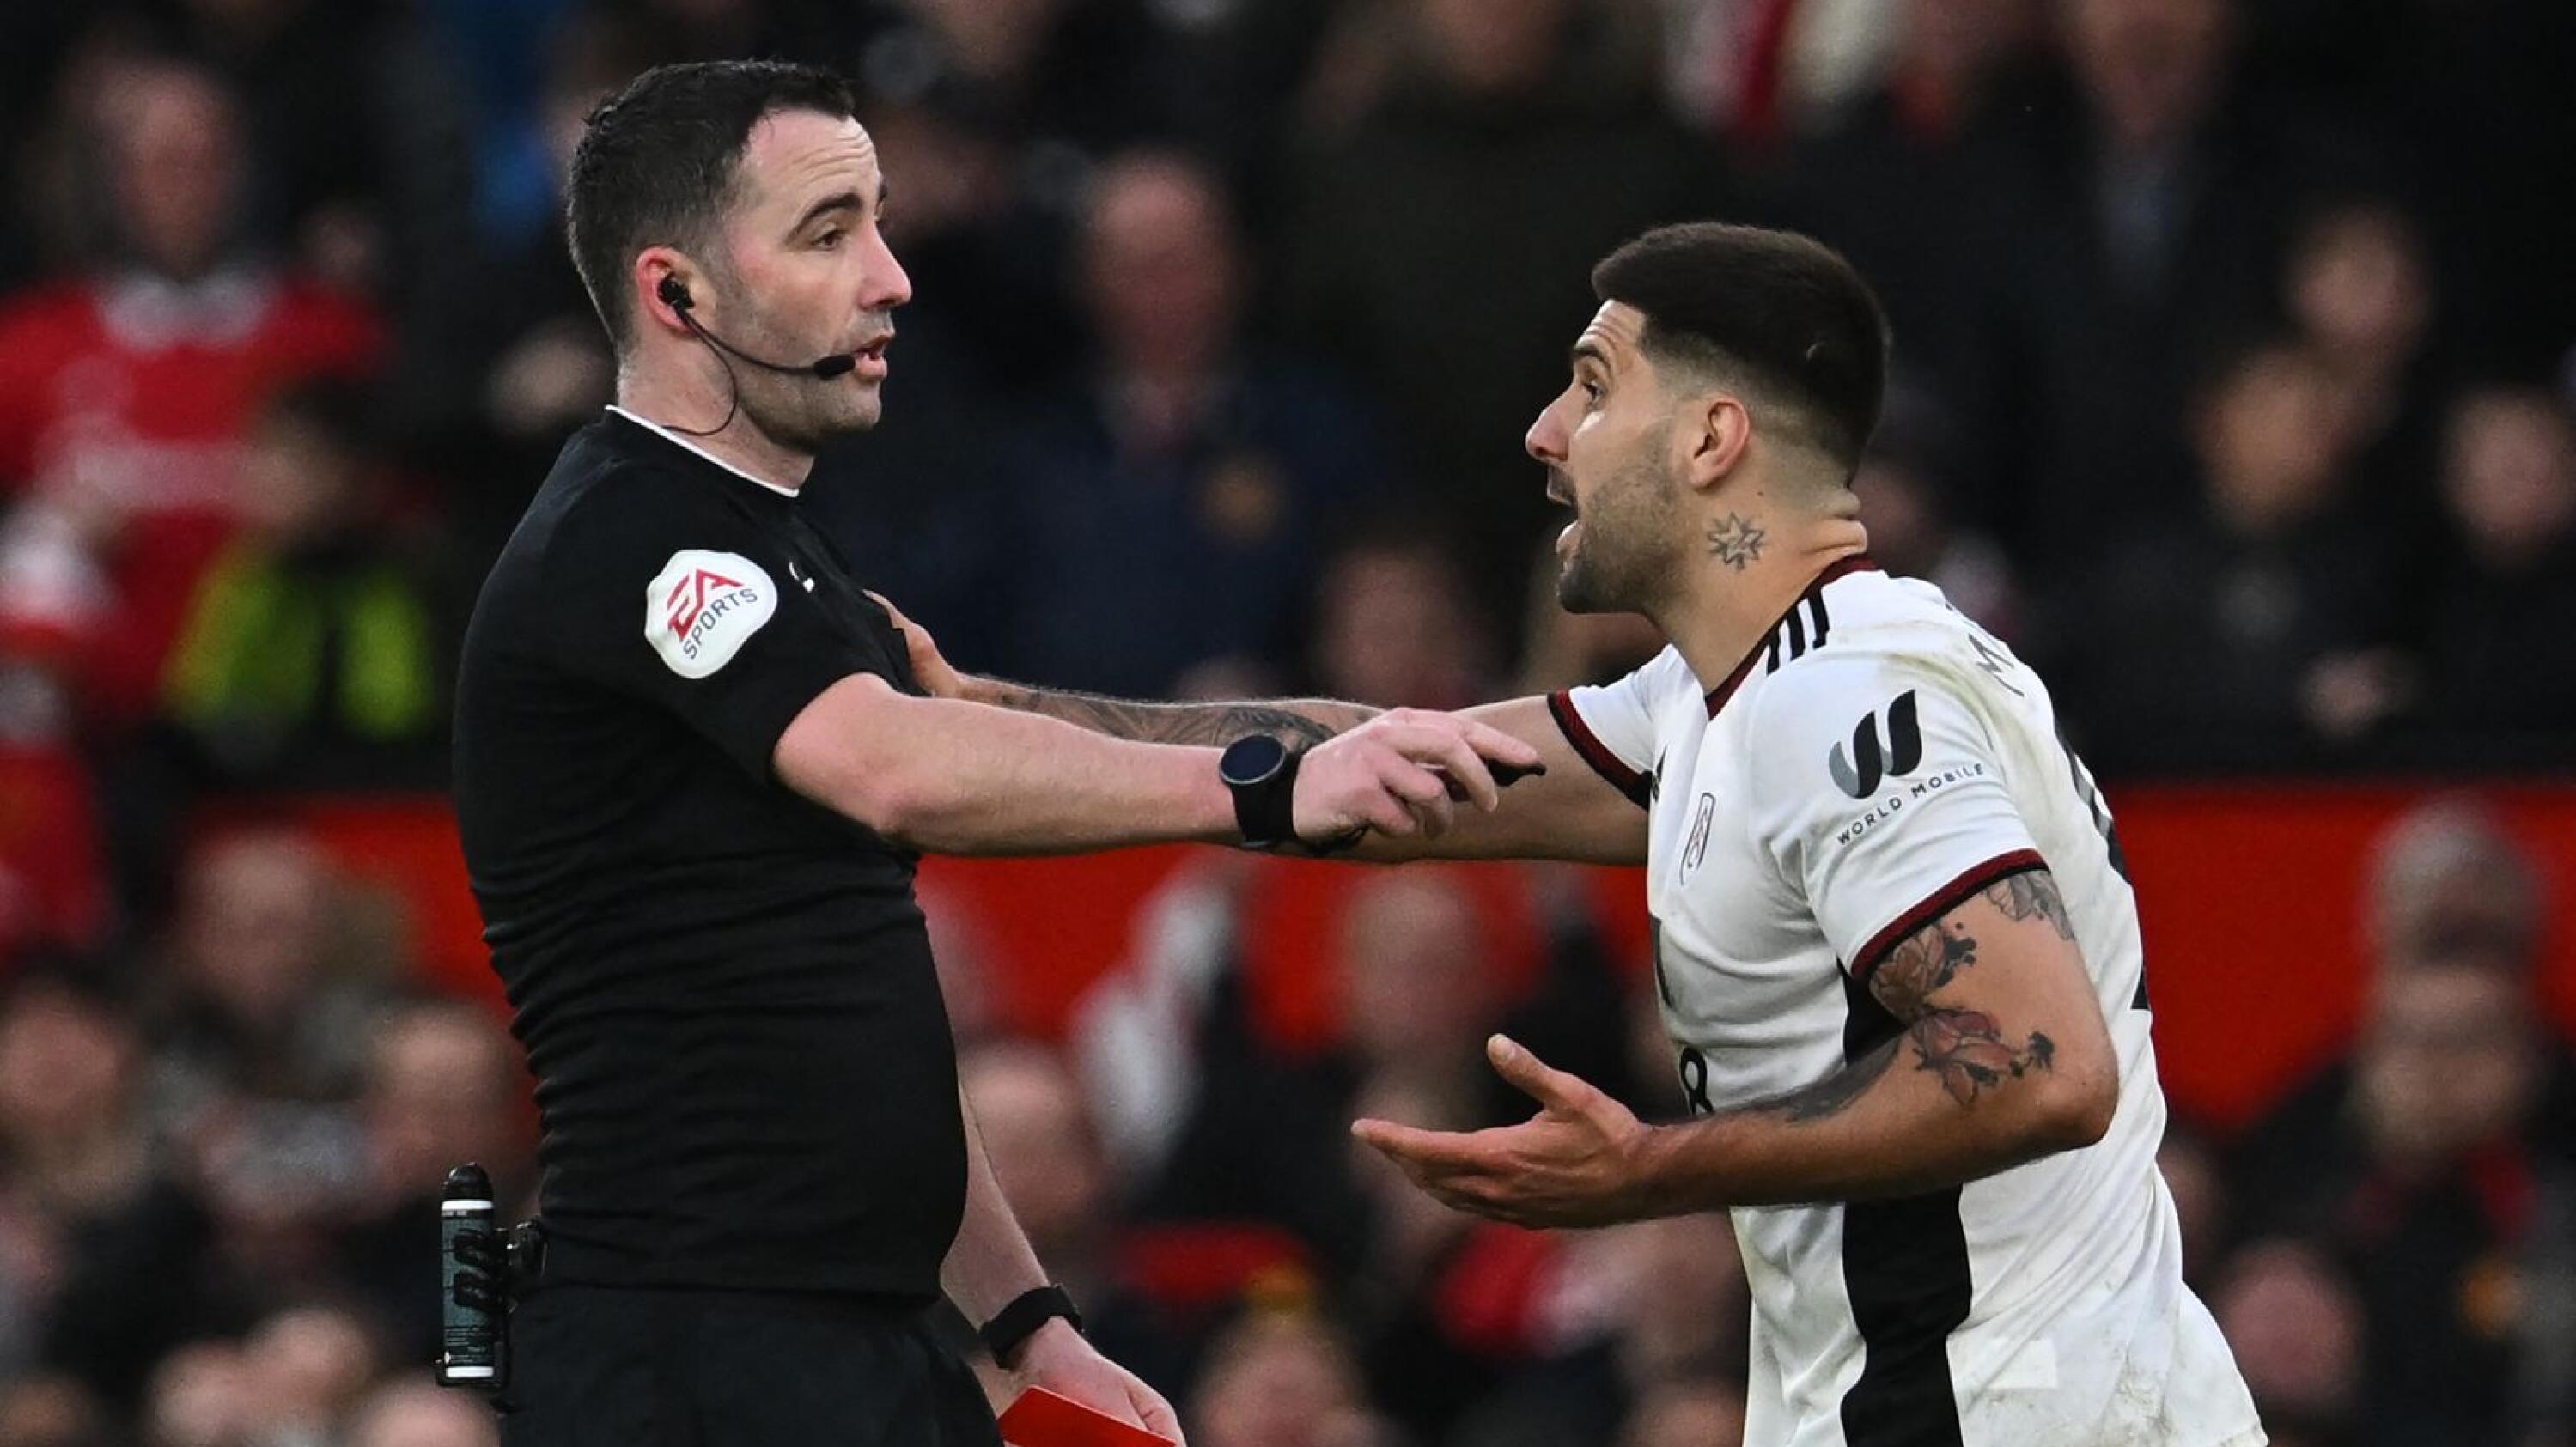 Aleksandar Mitrovic argued with referee Chris Kavanagh and got himself sent off during their FA Cup quarter-final against Manchester United last month.